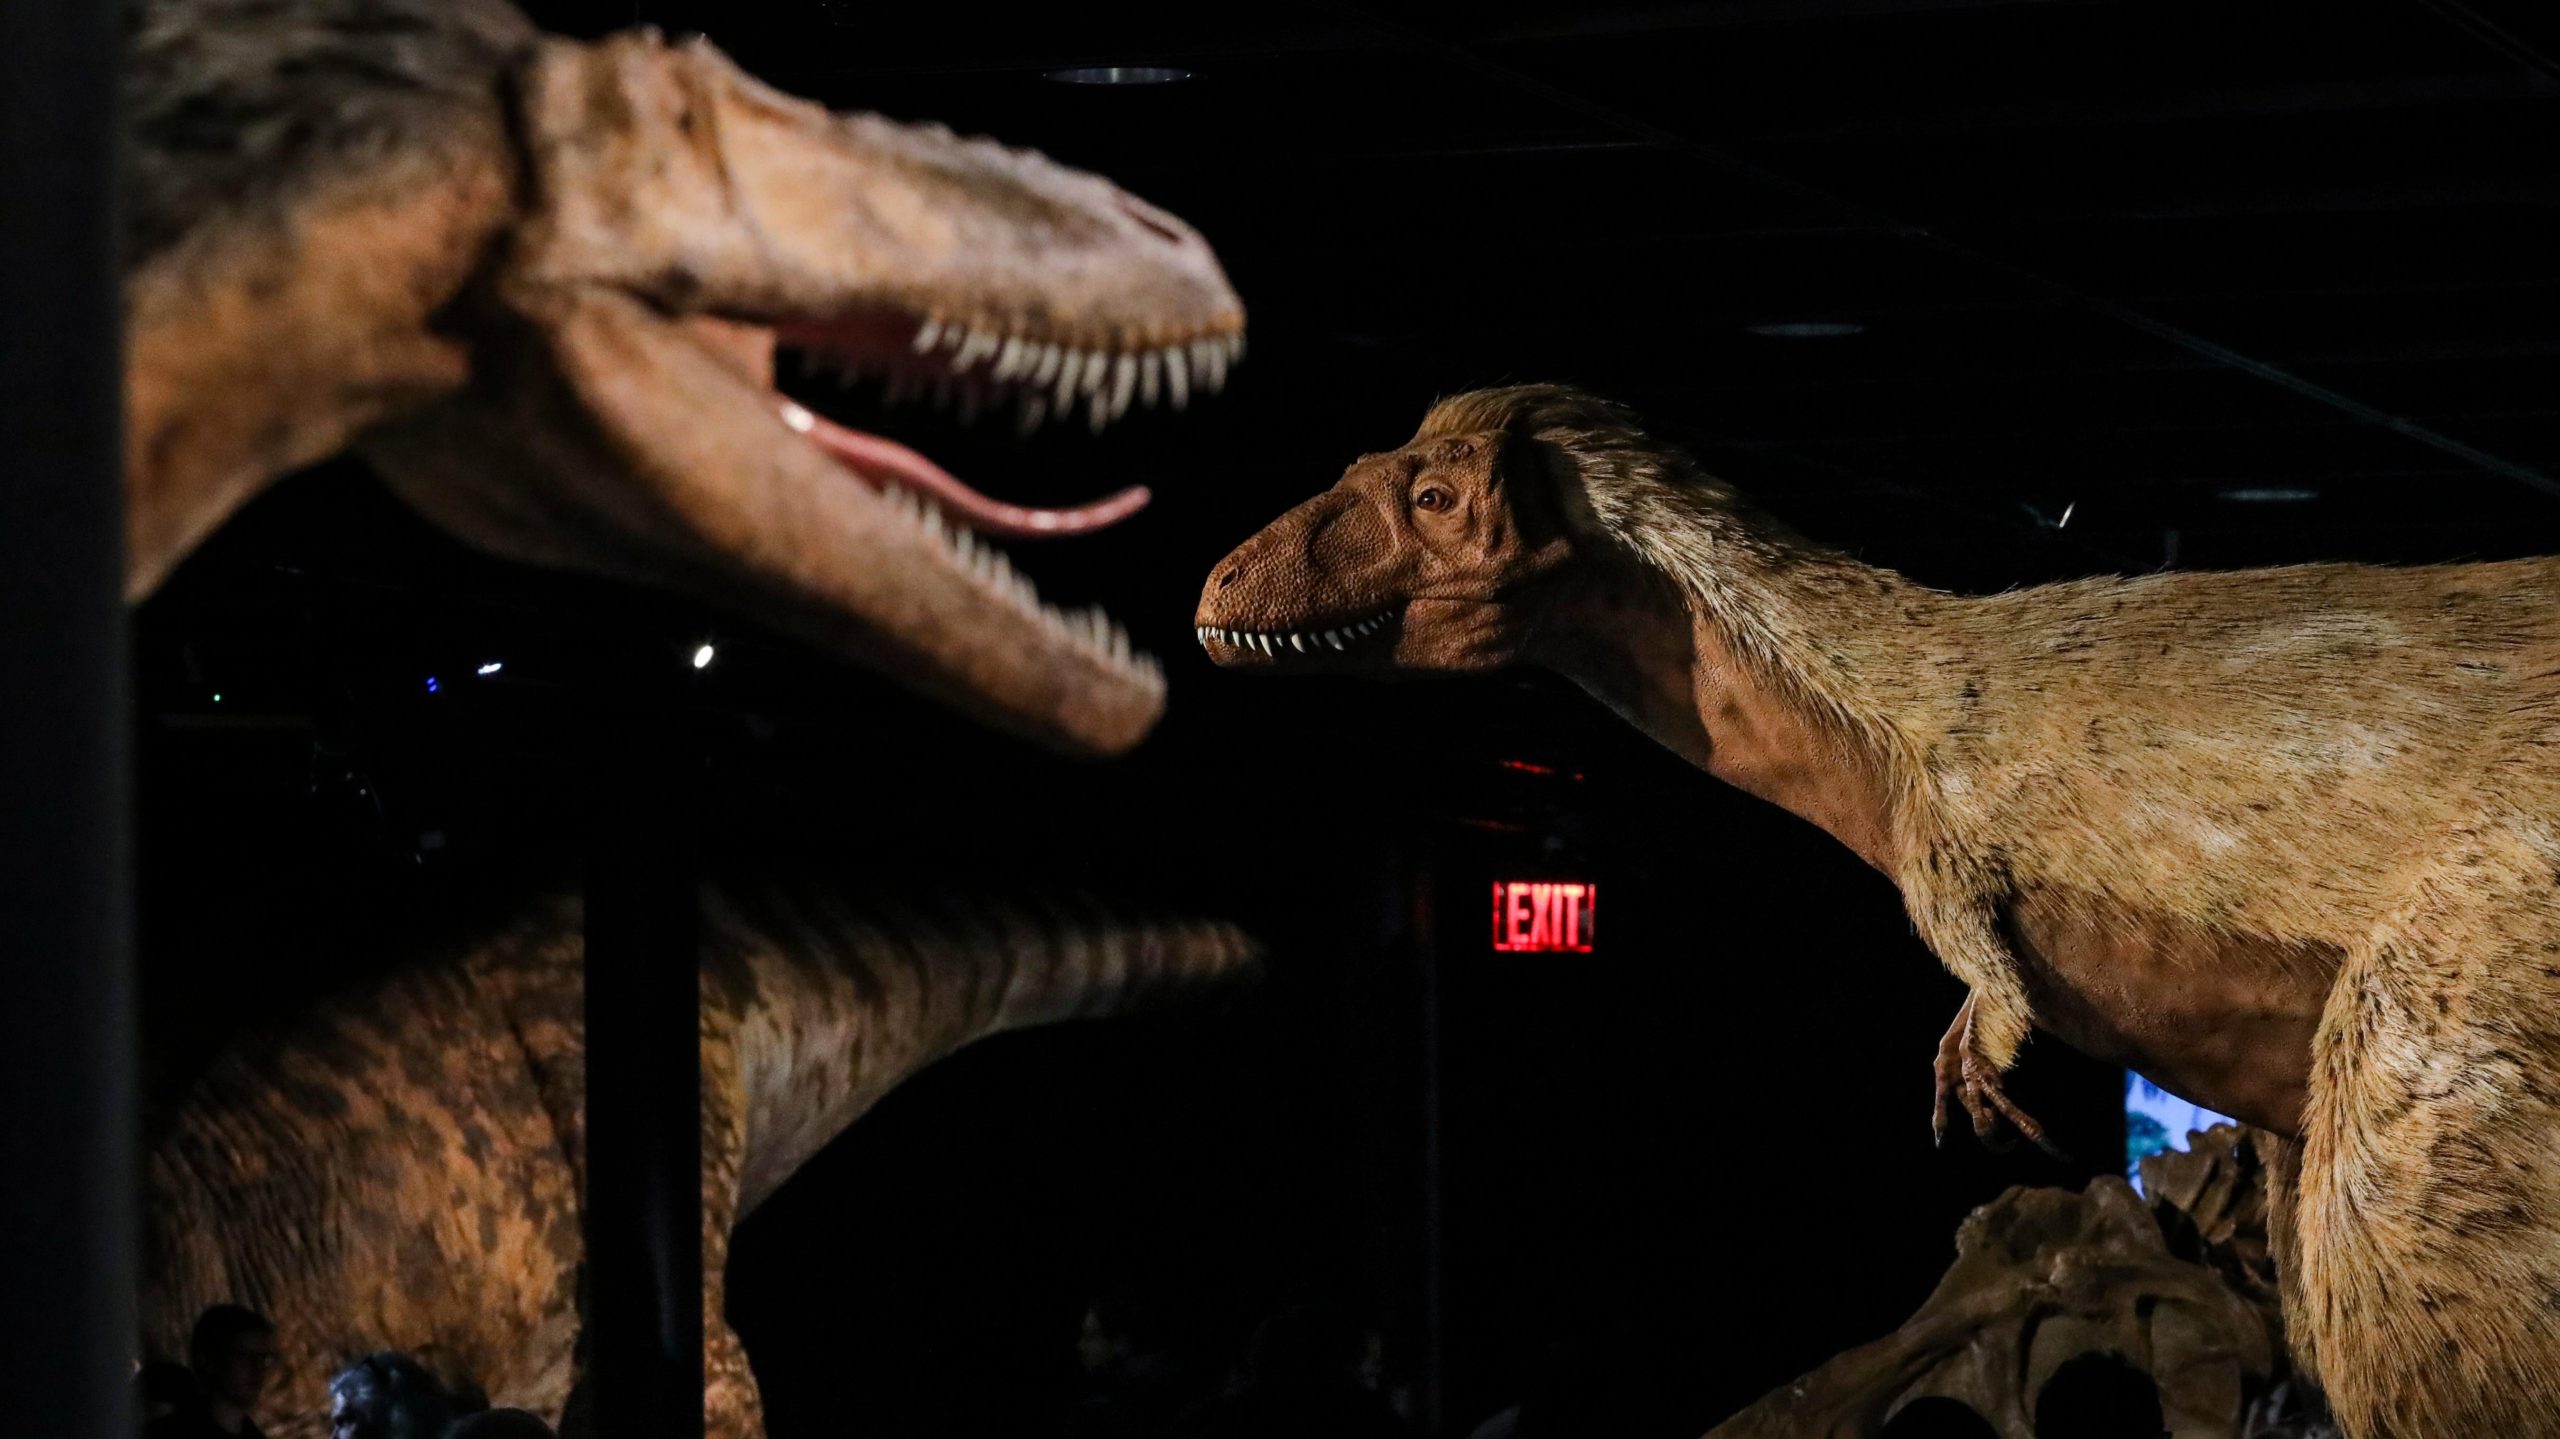 Models of Tyrannosaurus rex, a theropod dinosaur, at the American Museum of Natural History in 2019. (Photo: Drew Angerer, Getty Images)